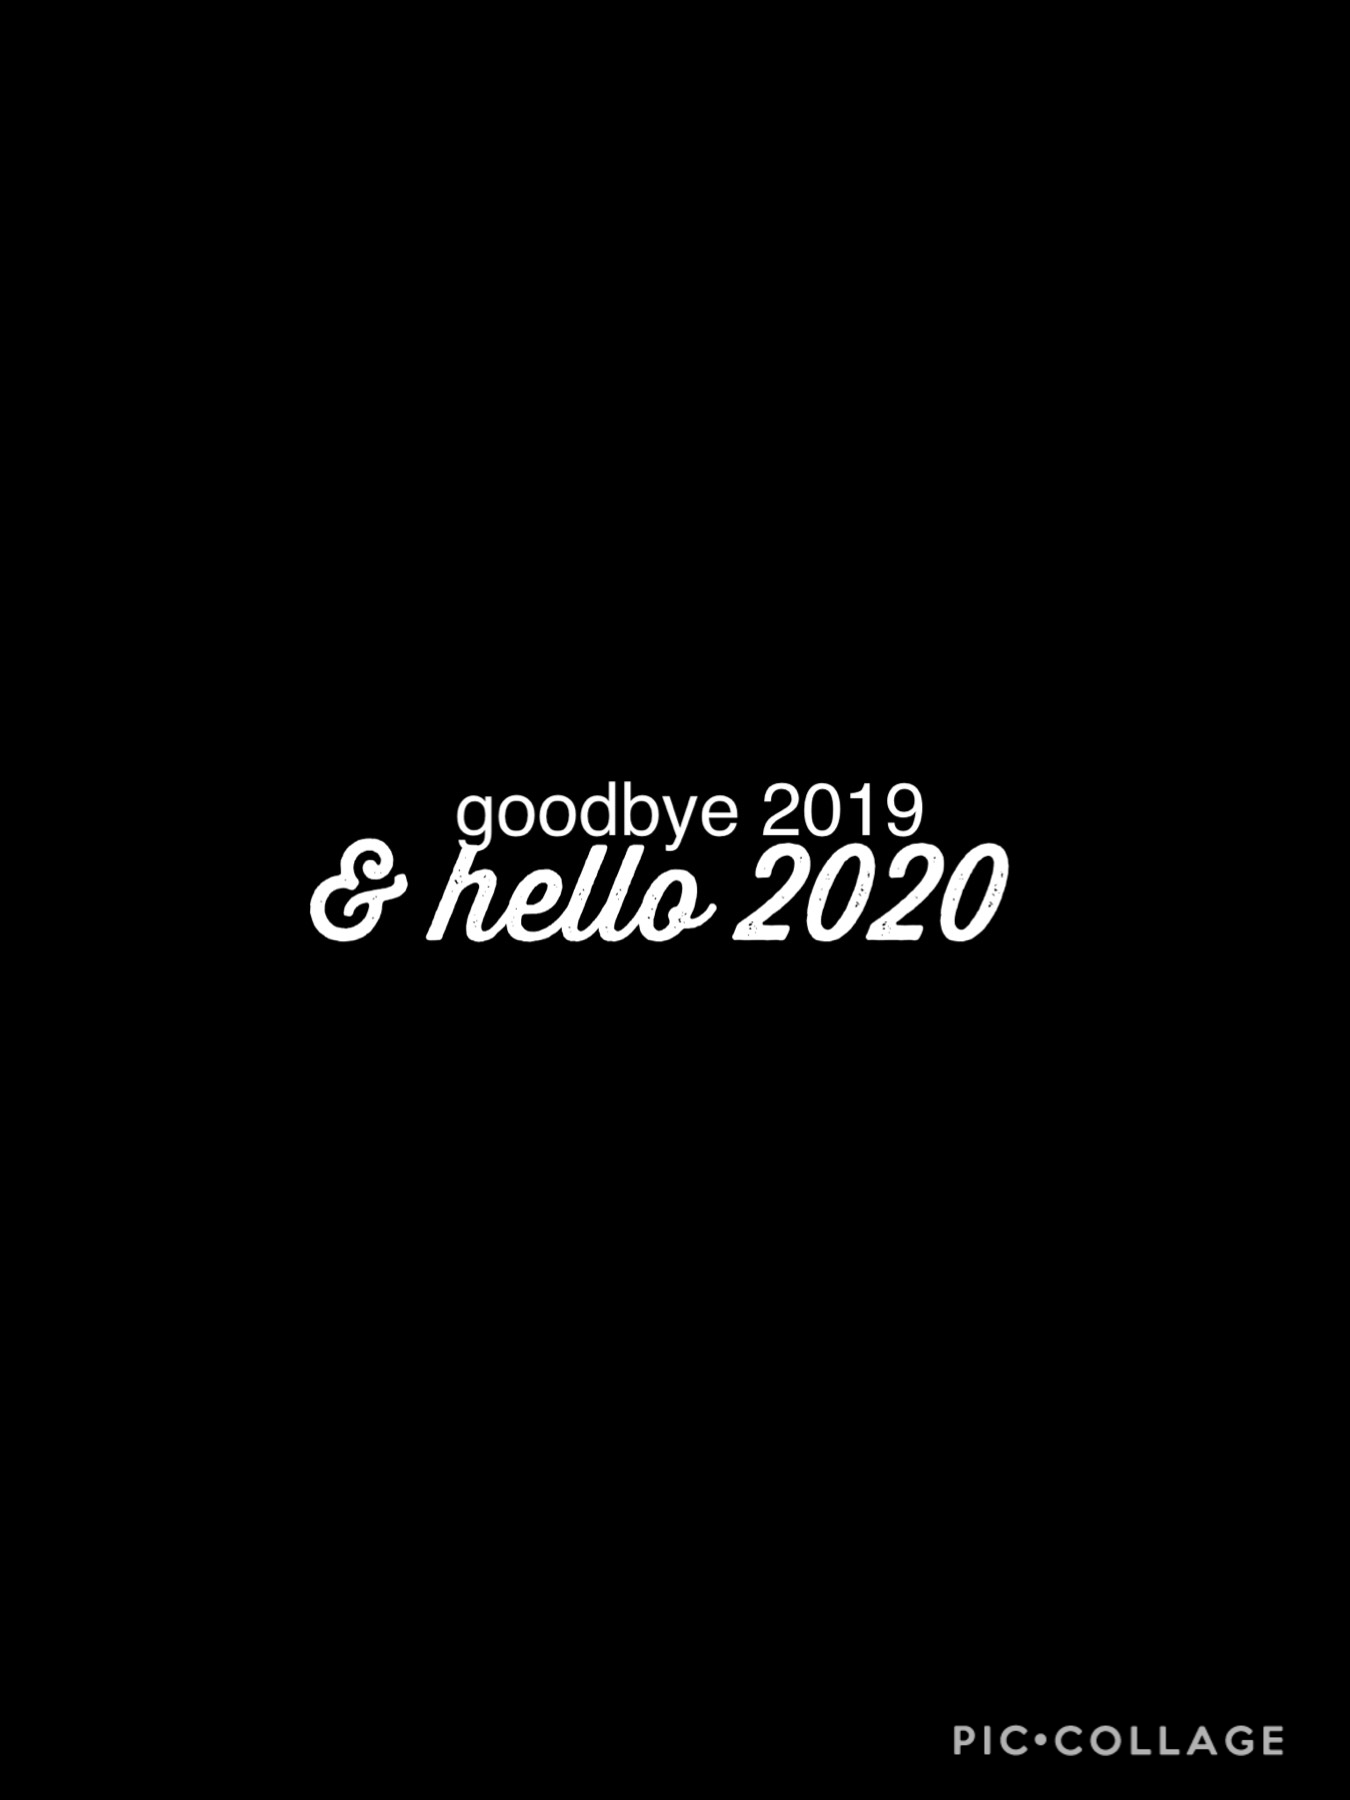 2020 !!! it’s a pretty late post but glad it’s 2020 & i’m hoping for a better year ⚡️ 2020 is already kind of rough but hopefully it’ll get better:) also guys please DONATE for the wildfires in Australia !! OVER 500 MILLION ANIMALS ARE DEAD — THATS 200 MI